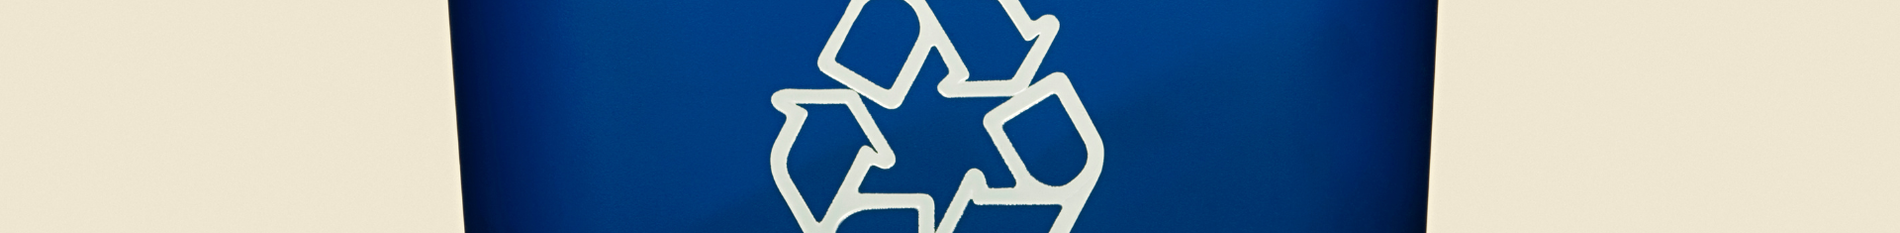 Blog-Banner-what-do-plastic-recycling-symbols-mean